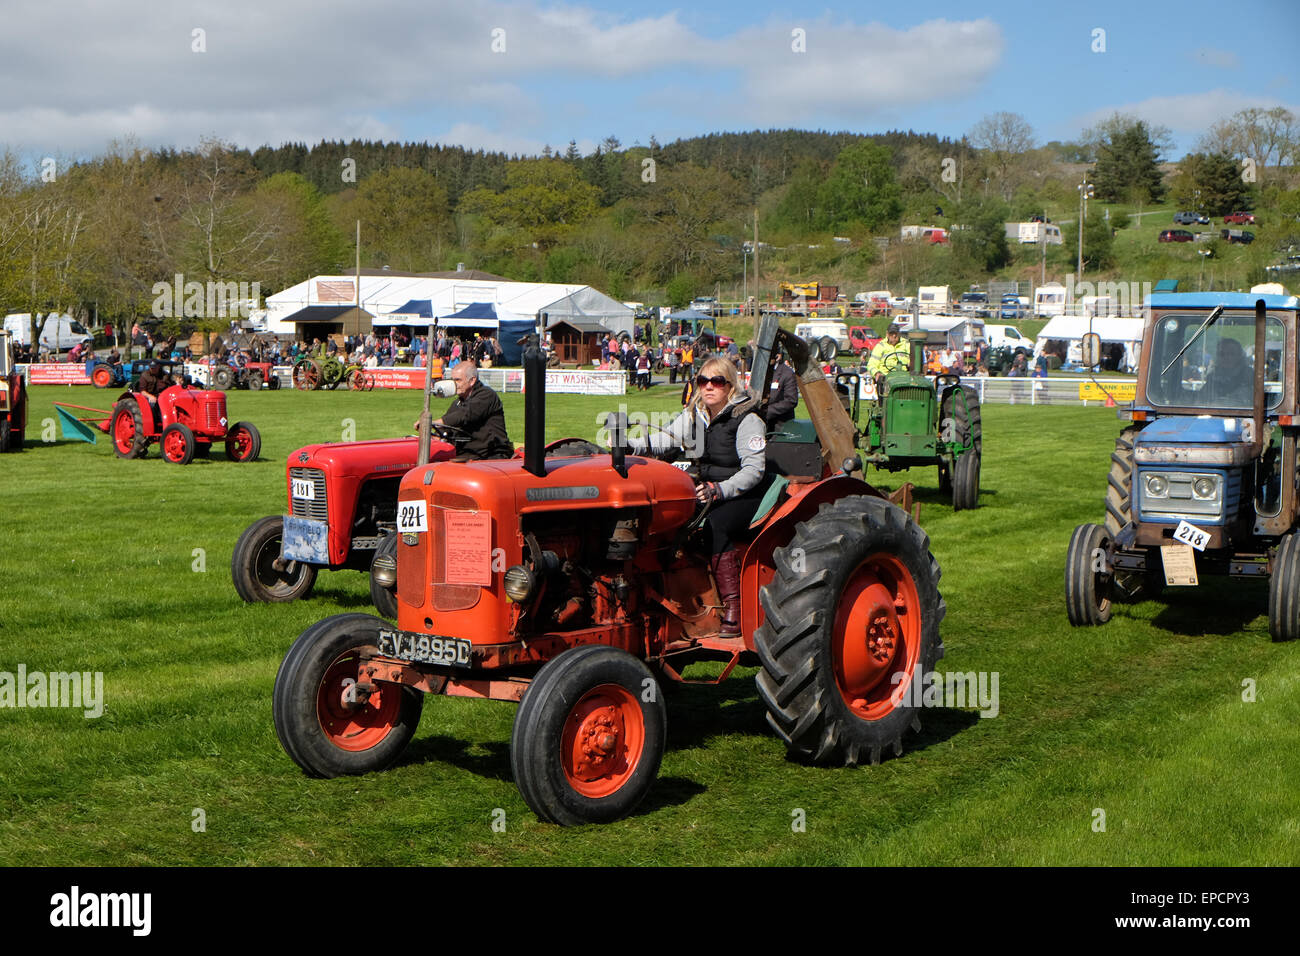 Royal Welsh Spring Festival  Builth Wells, Powys, Wales, UK May, 2015.  Festival parade of vintage tractors and vehicles. Over 80 vehicles took part in the procession around the display arena including this Nuffield tractor from the mid 1960s. Stock Photo